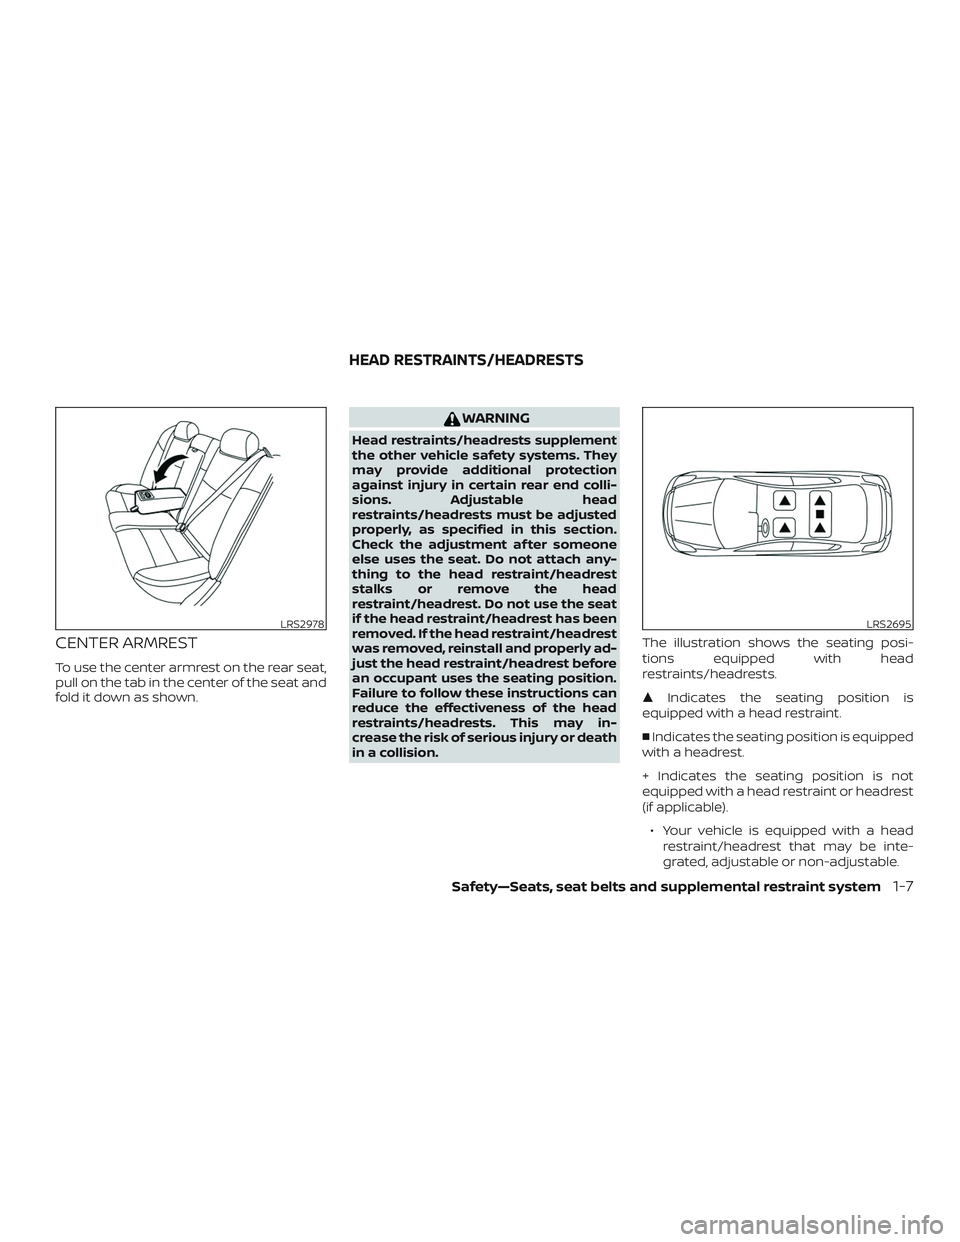 NISSAN MAXIMA 2019  Owner´s Manual CENTER ARMREST
To use the center armrest on the rear seat,
pull on the tab in the center of the seat and
fold it down as shown.
WARNING
Head restraints/headrests supplement
the other vehicle safety sy